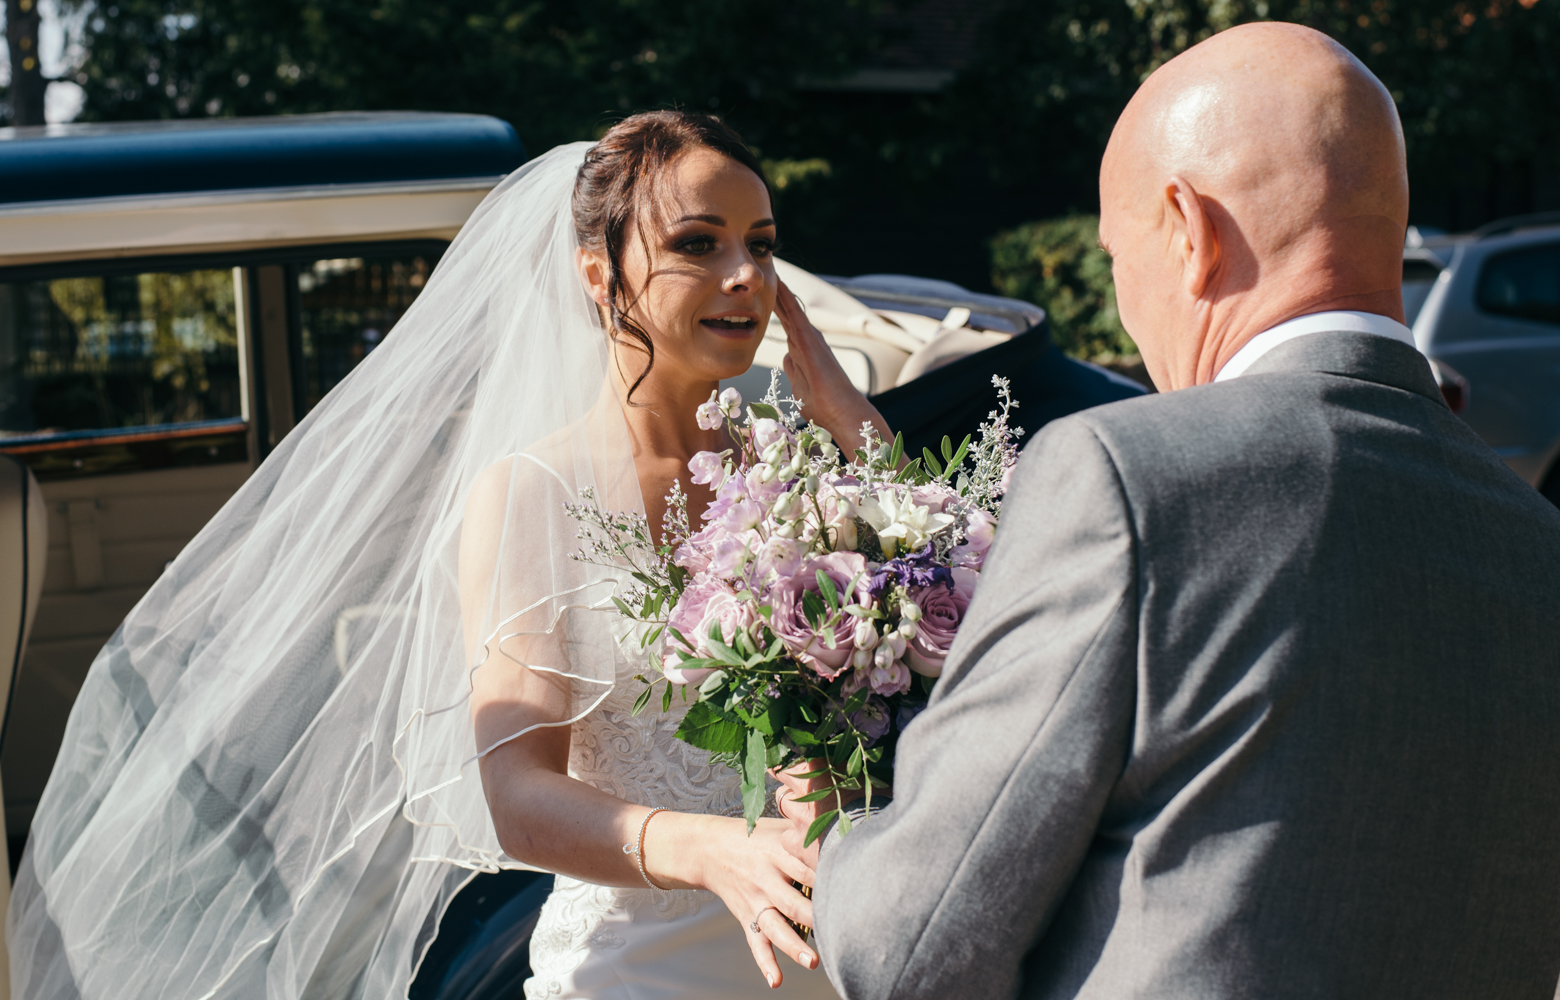 The bride and her father as she gets out of the car at church